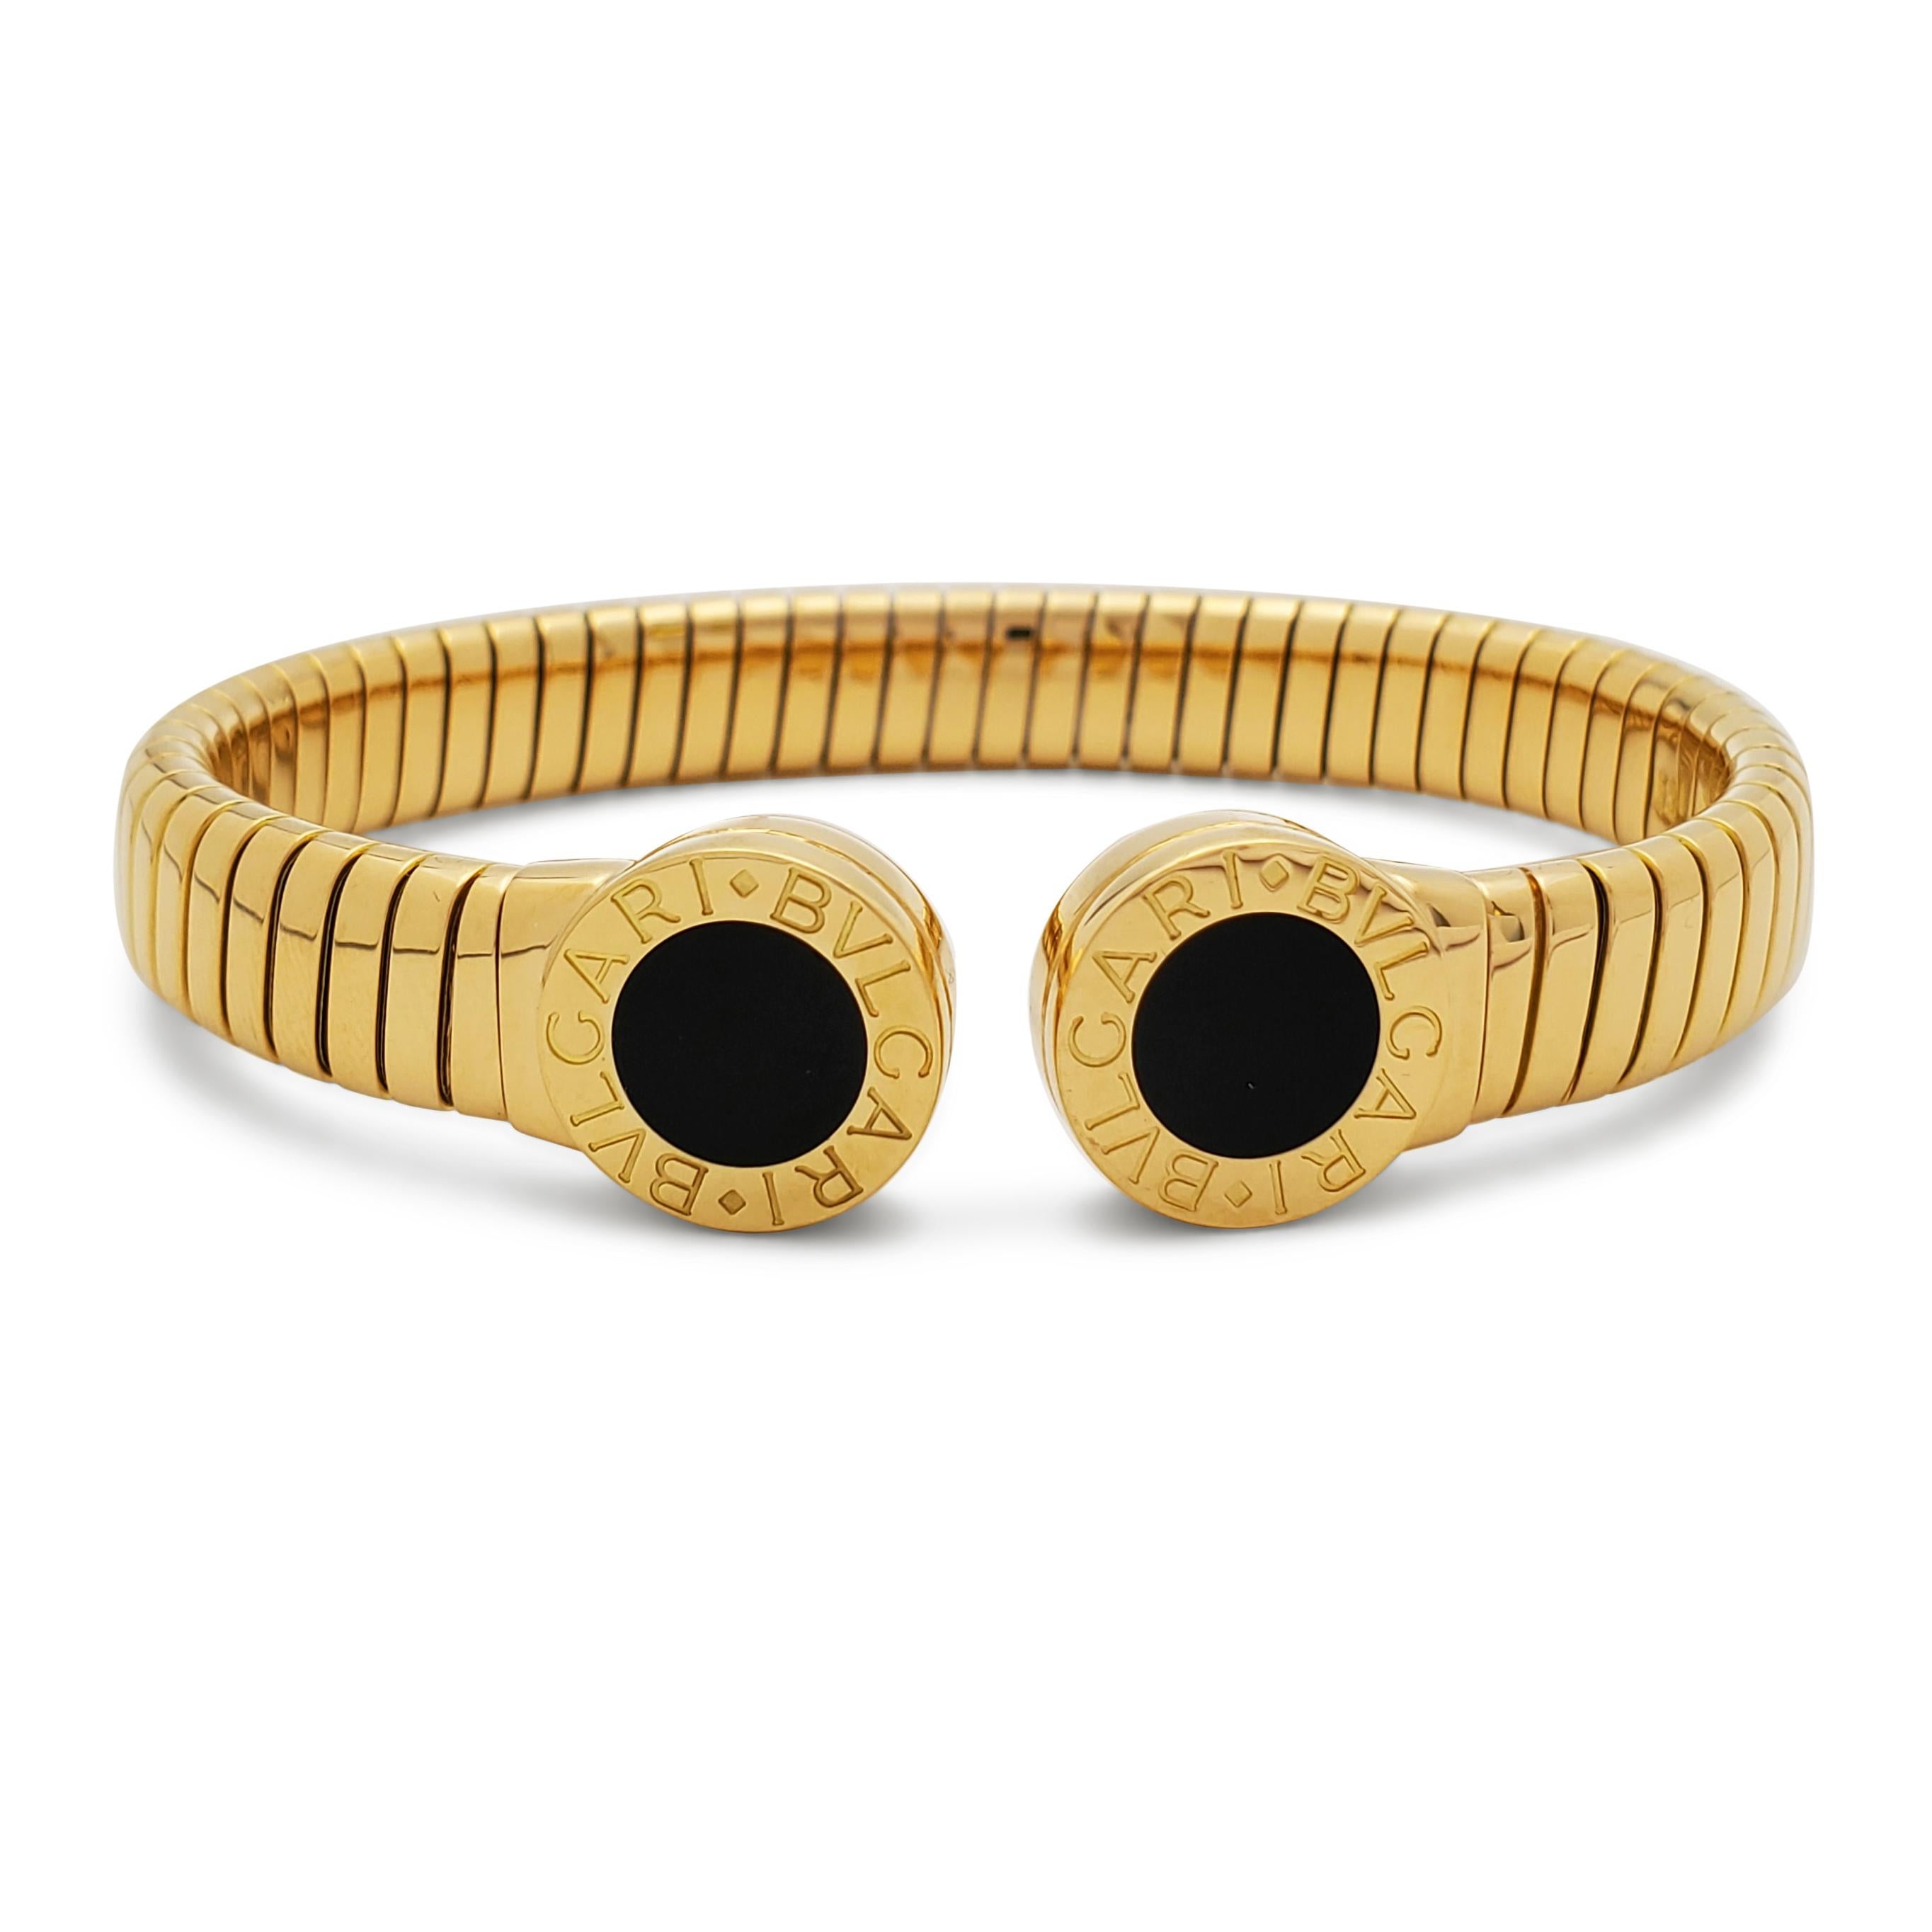 Authentic Bvlgari 'Tubogas' bangle bracelet crafted in 18 karat yellow gold with stainless steel interior mechanism.  A circular onyx stone is set at each end of the split bracelet.  The bracelet measures 8.4mm in width and will fit up to a size 6